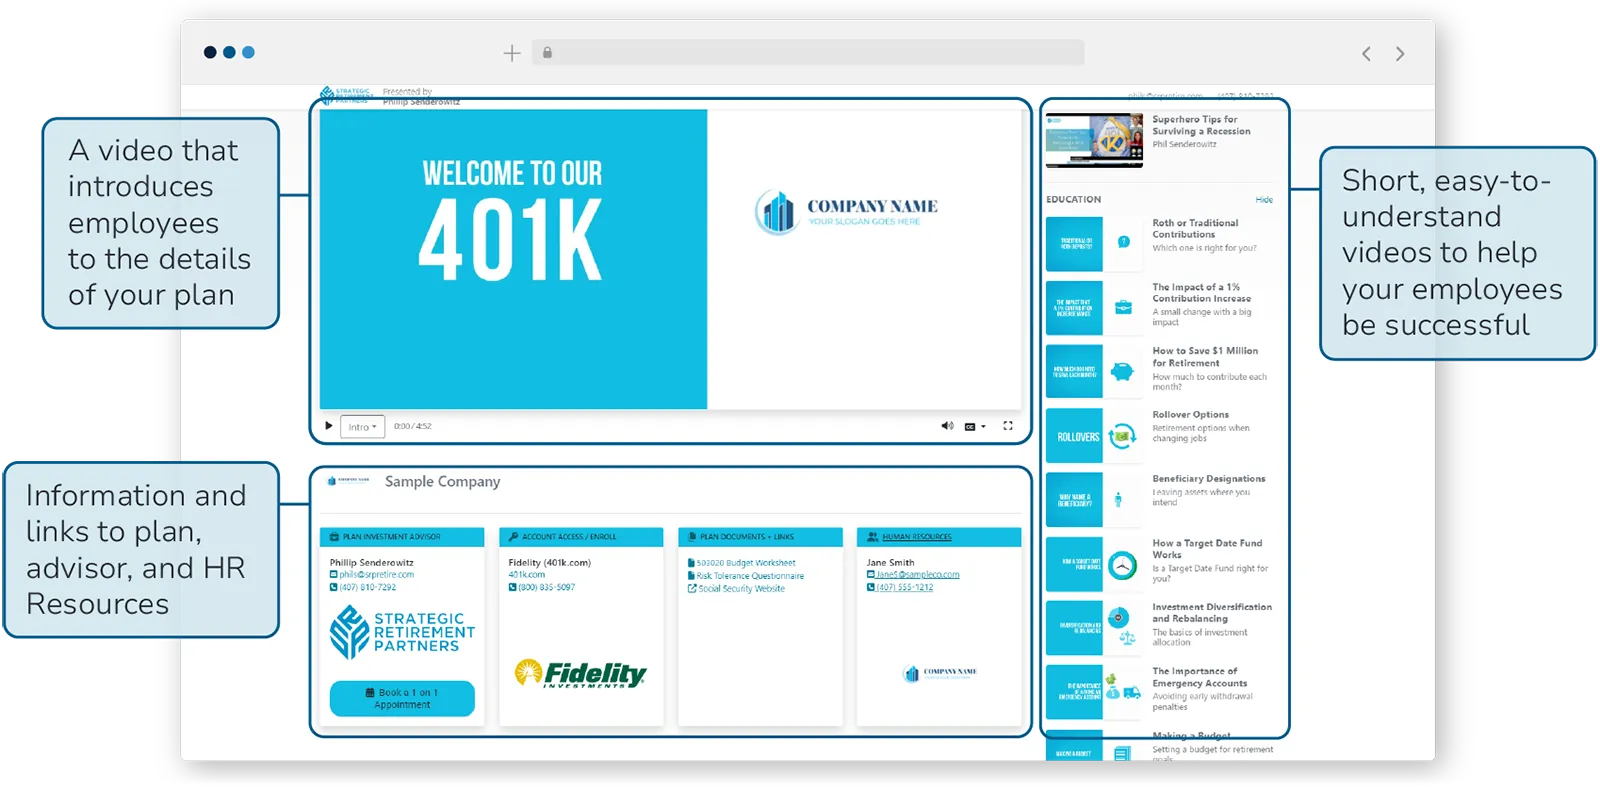 Screenshot showing an example of the custom web portal with labels describing 3 sections. The 3 sections are (1) a video that introduces employees to the details of your plan, (2) information and links to plan, advisor, and HR resources, and (3) a list of short, easy-to-understand videos to help your employees be successful.